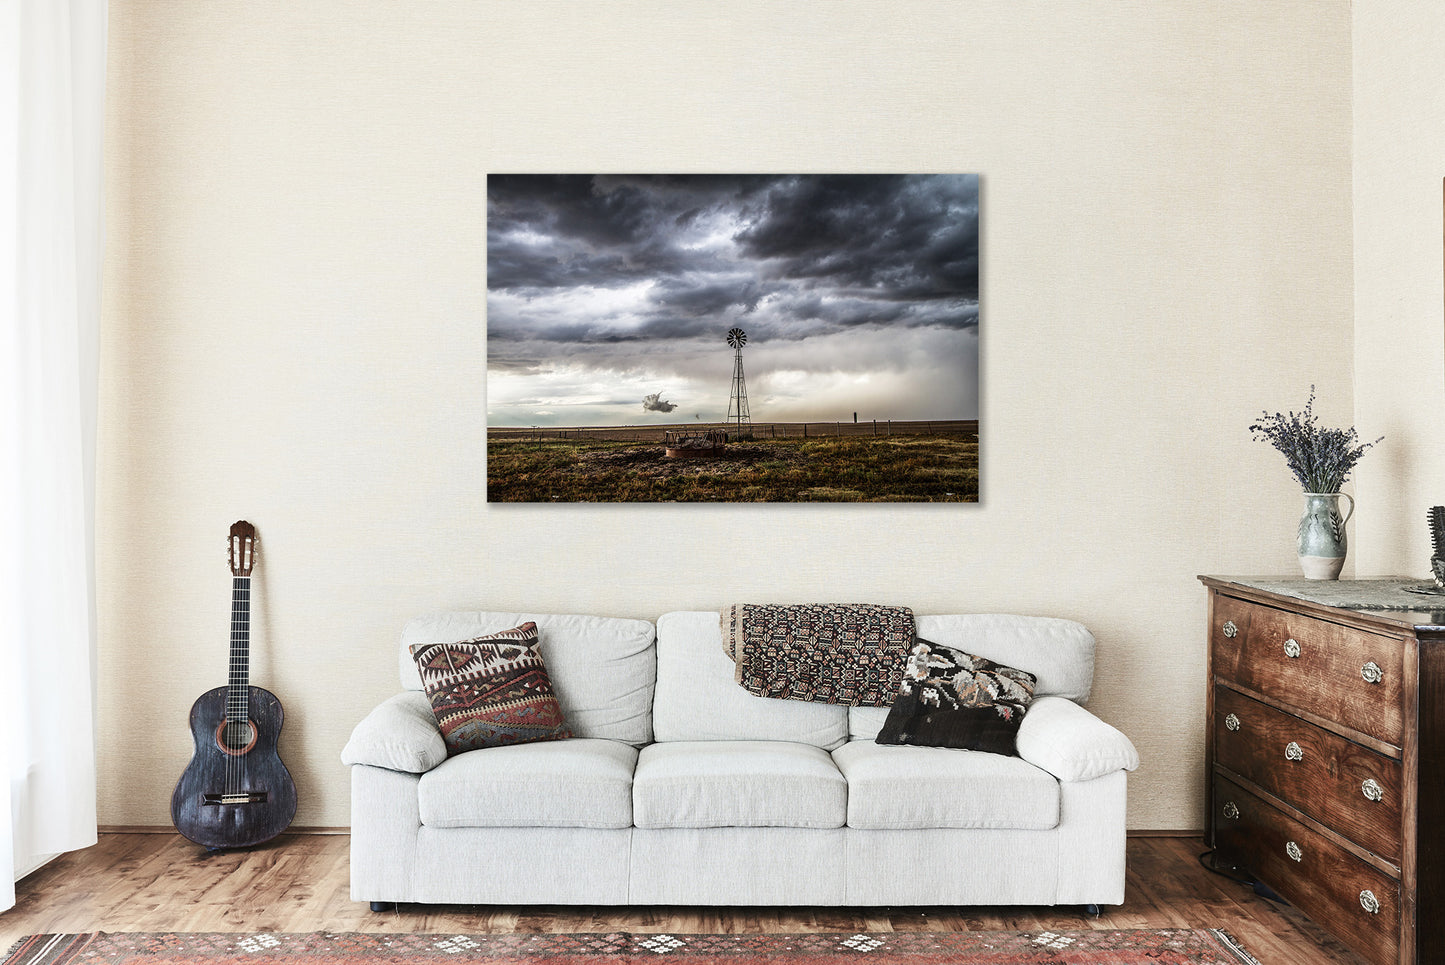 Farmhouse Metal Print - Picture of Windmill Under Stormy Sky on Spring Day in Oklahoma - Ready to Hang Farm Photo Country Wall Art Decor